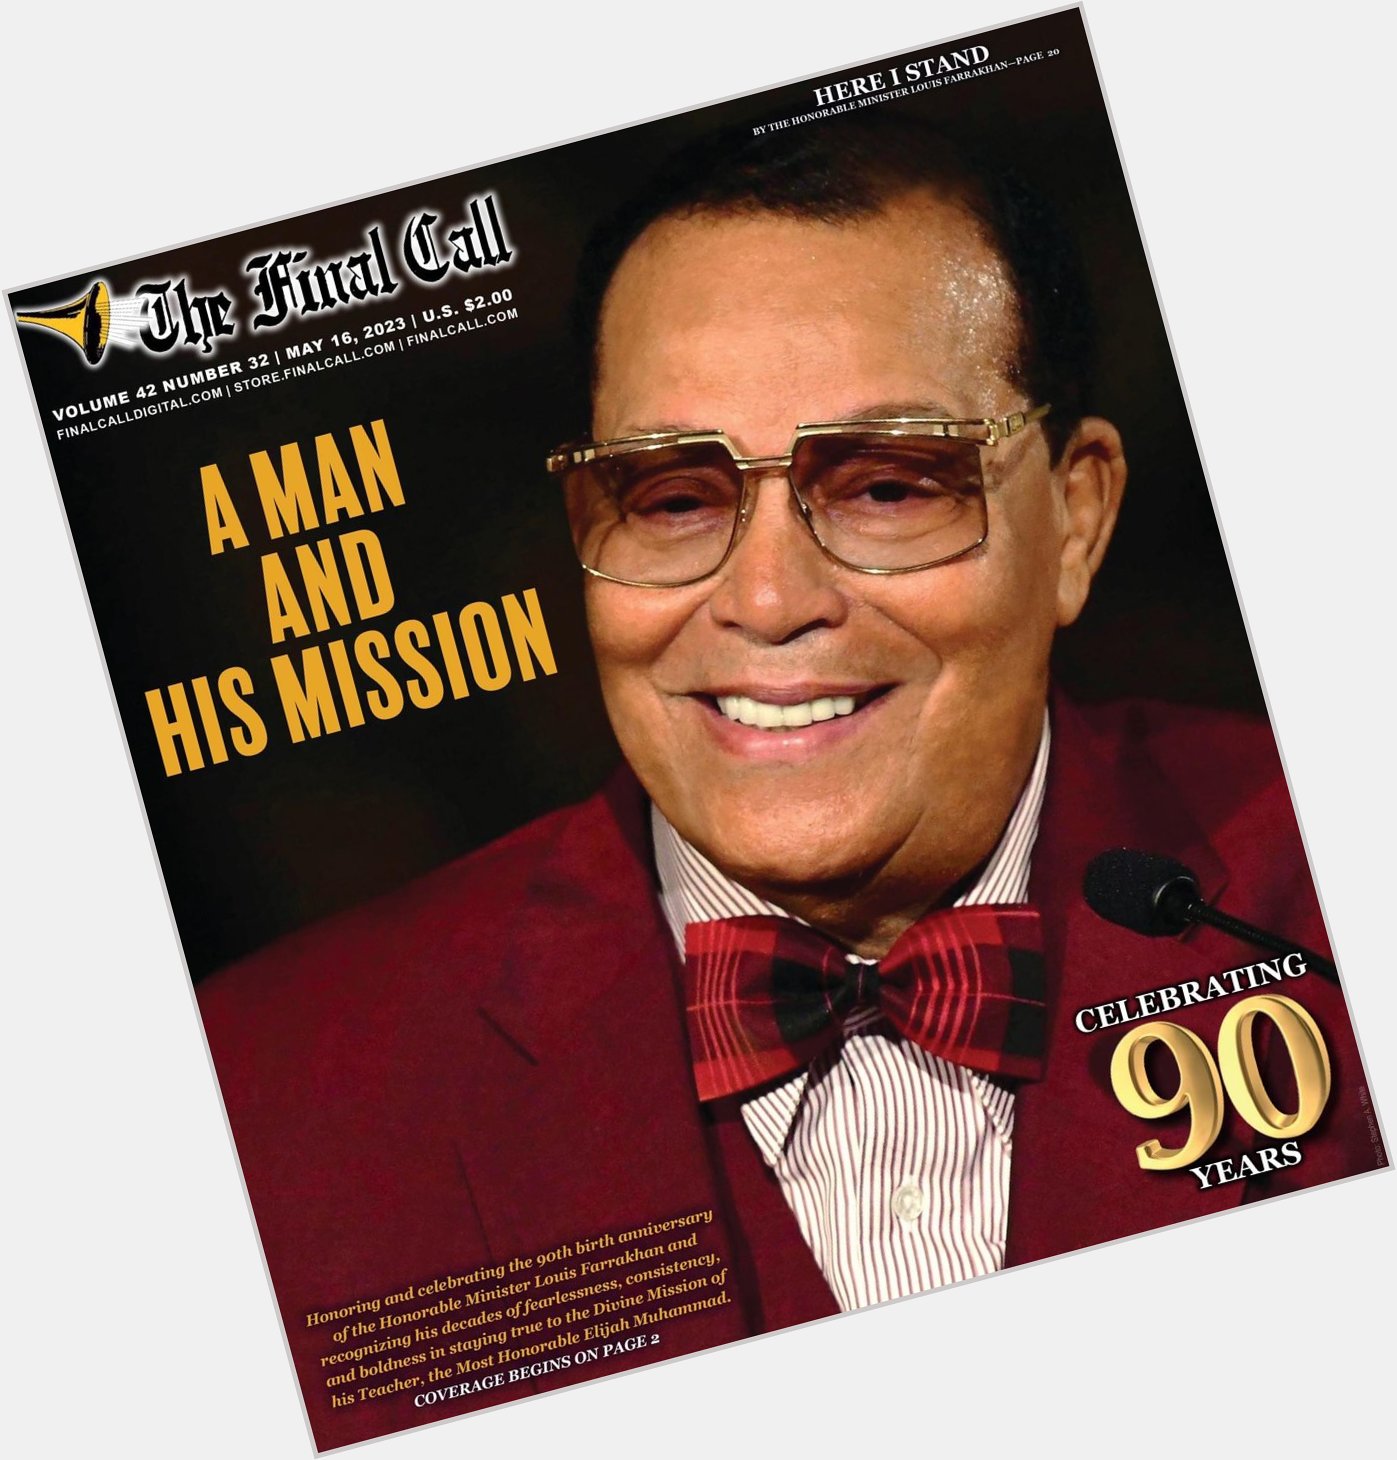  Happy Birthday Brother Minister Louis Farrakhan 